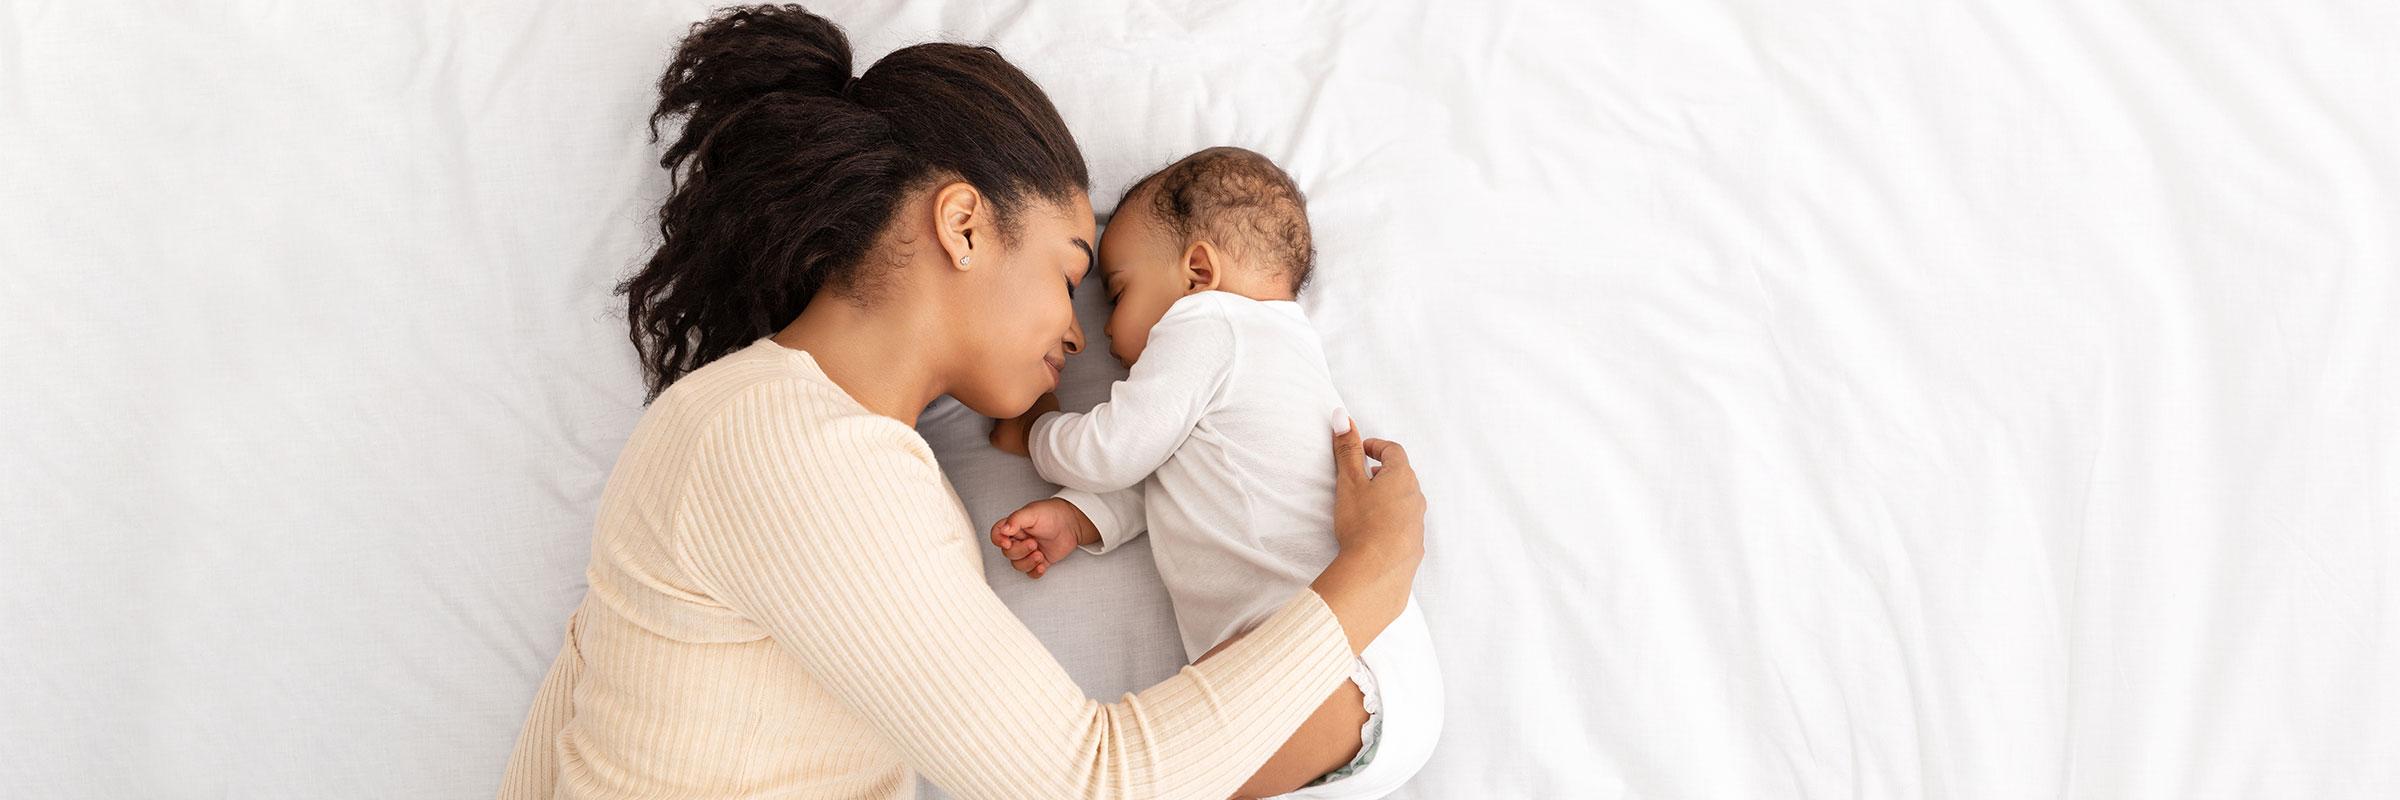 Young black mother cuddles her infant on a bed of white sheets.